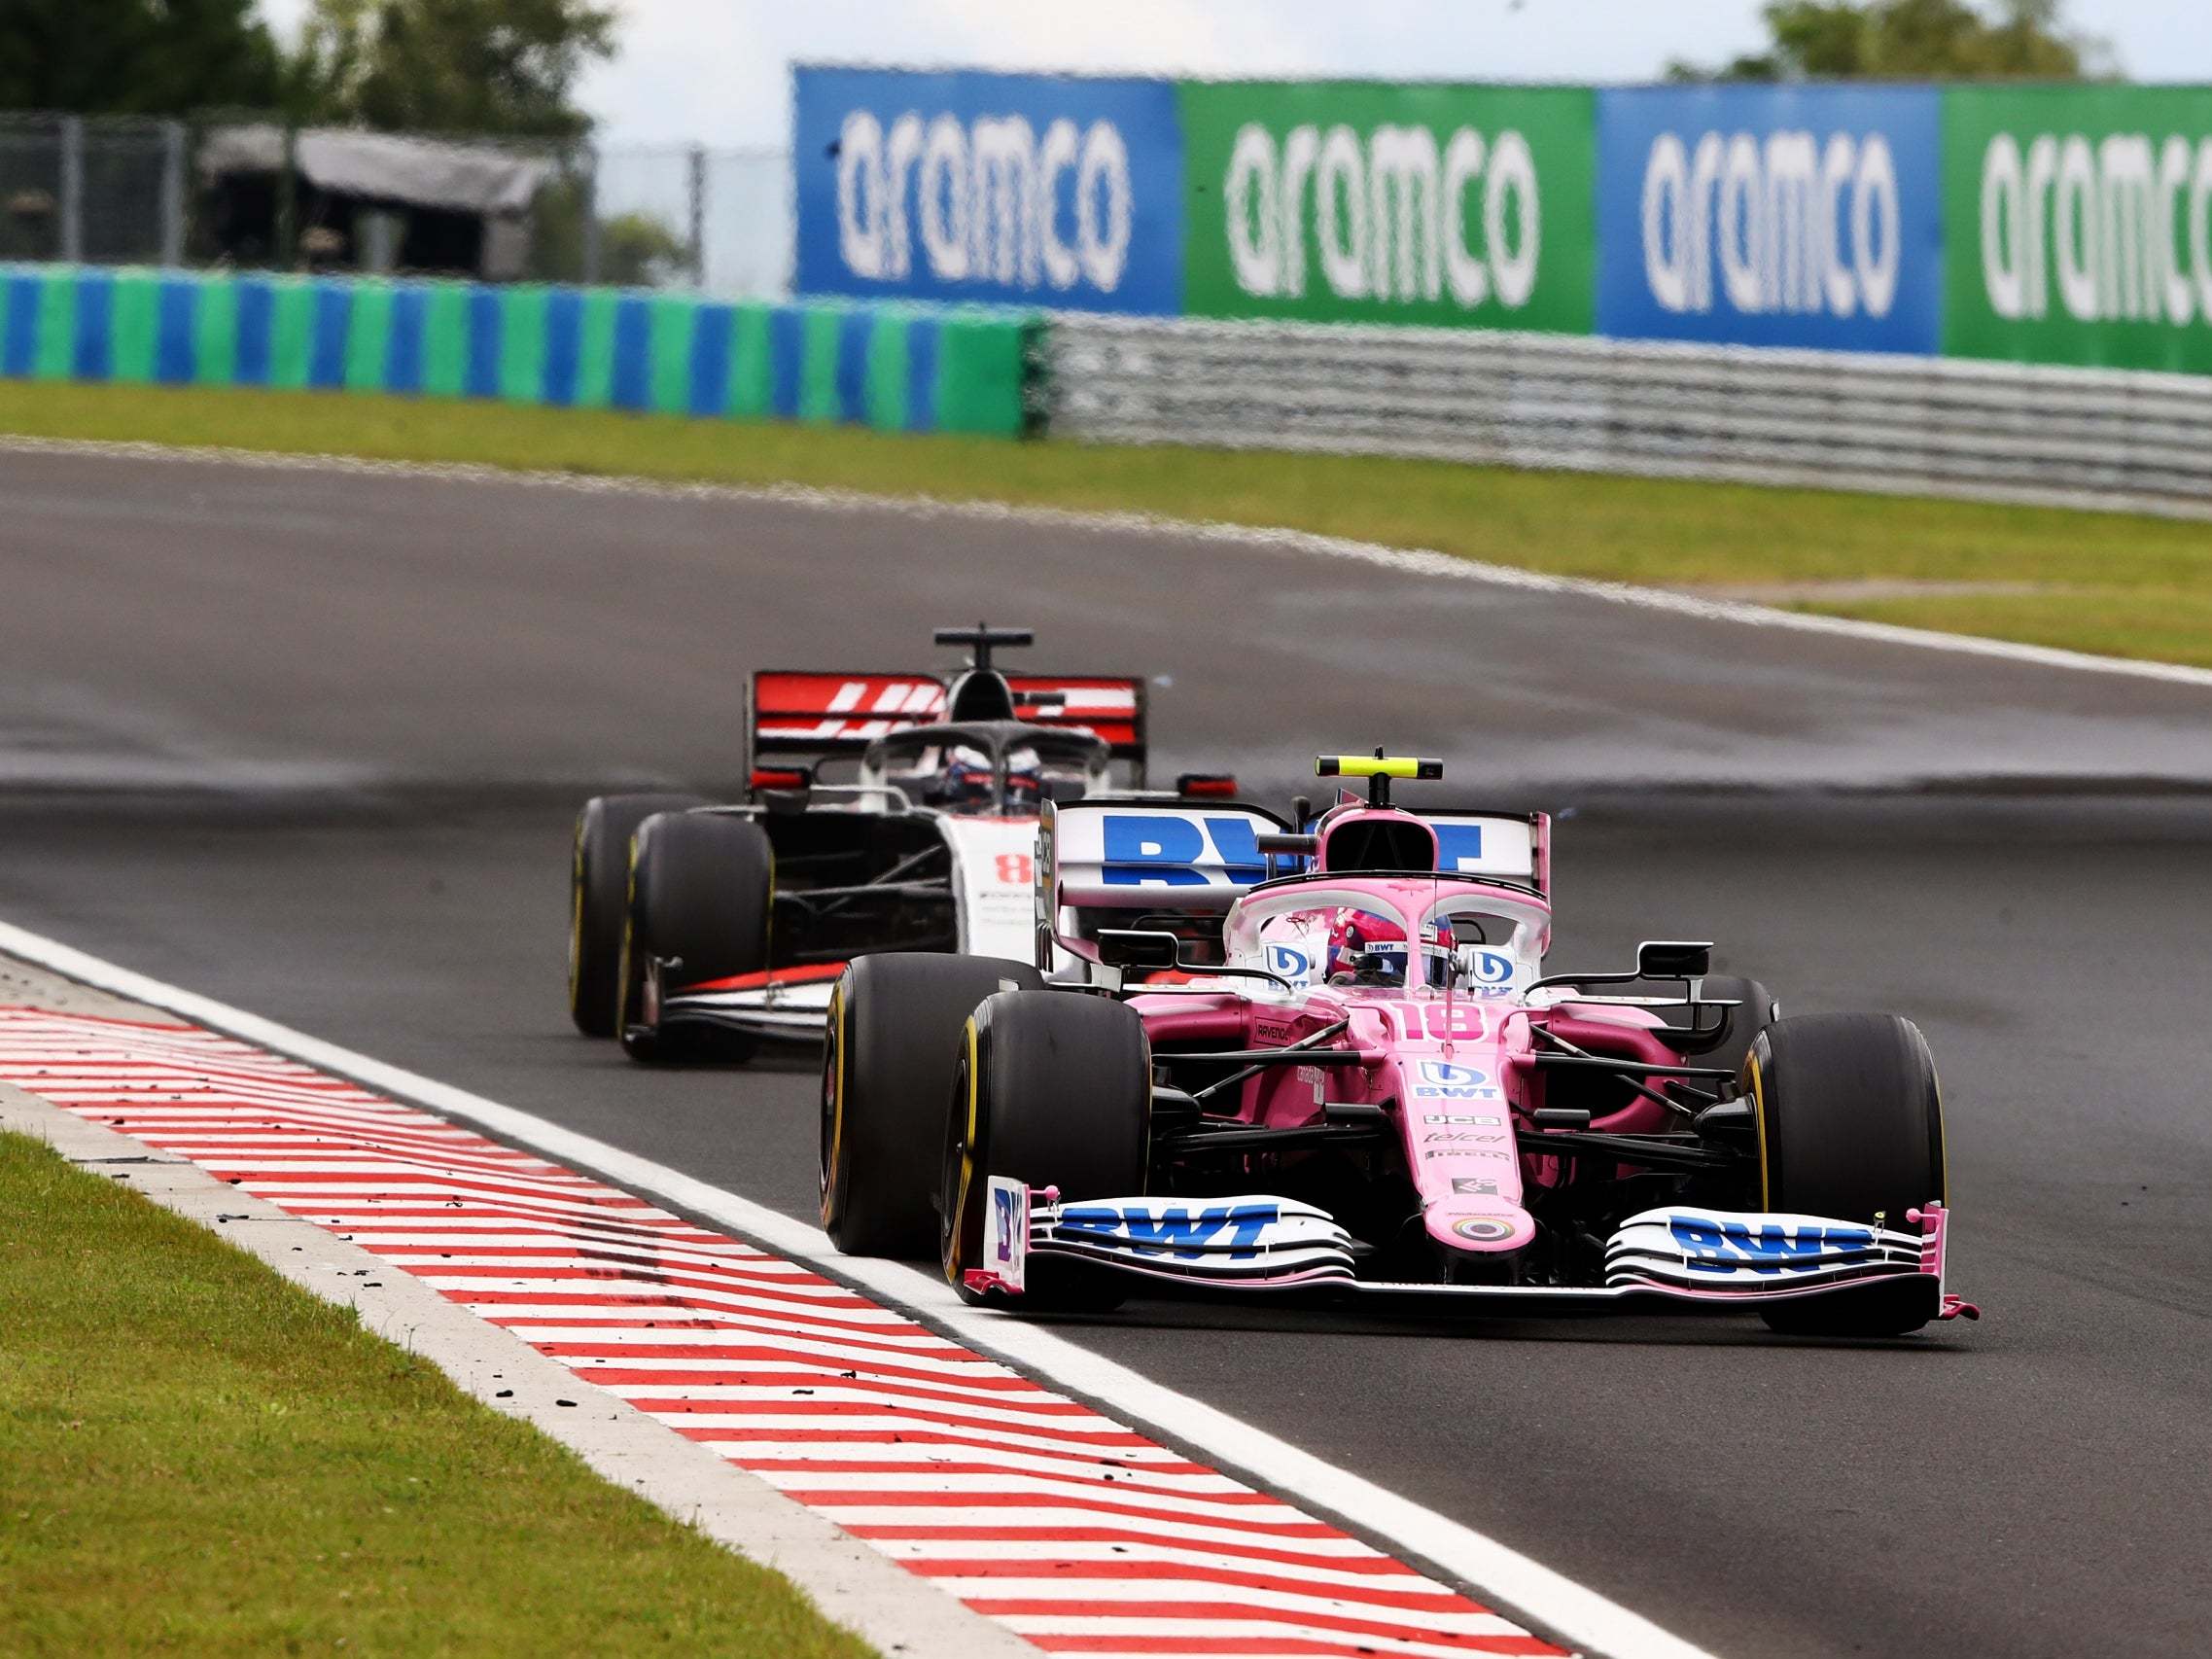 Lance Stroll delivered his strongest performance of his career so far